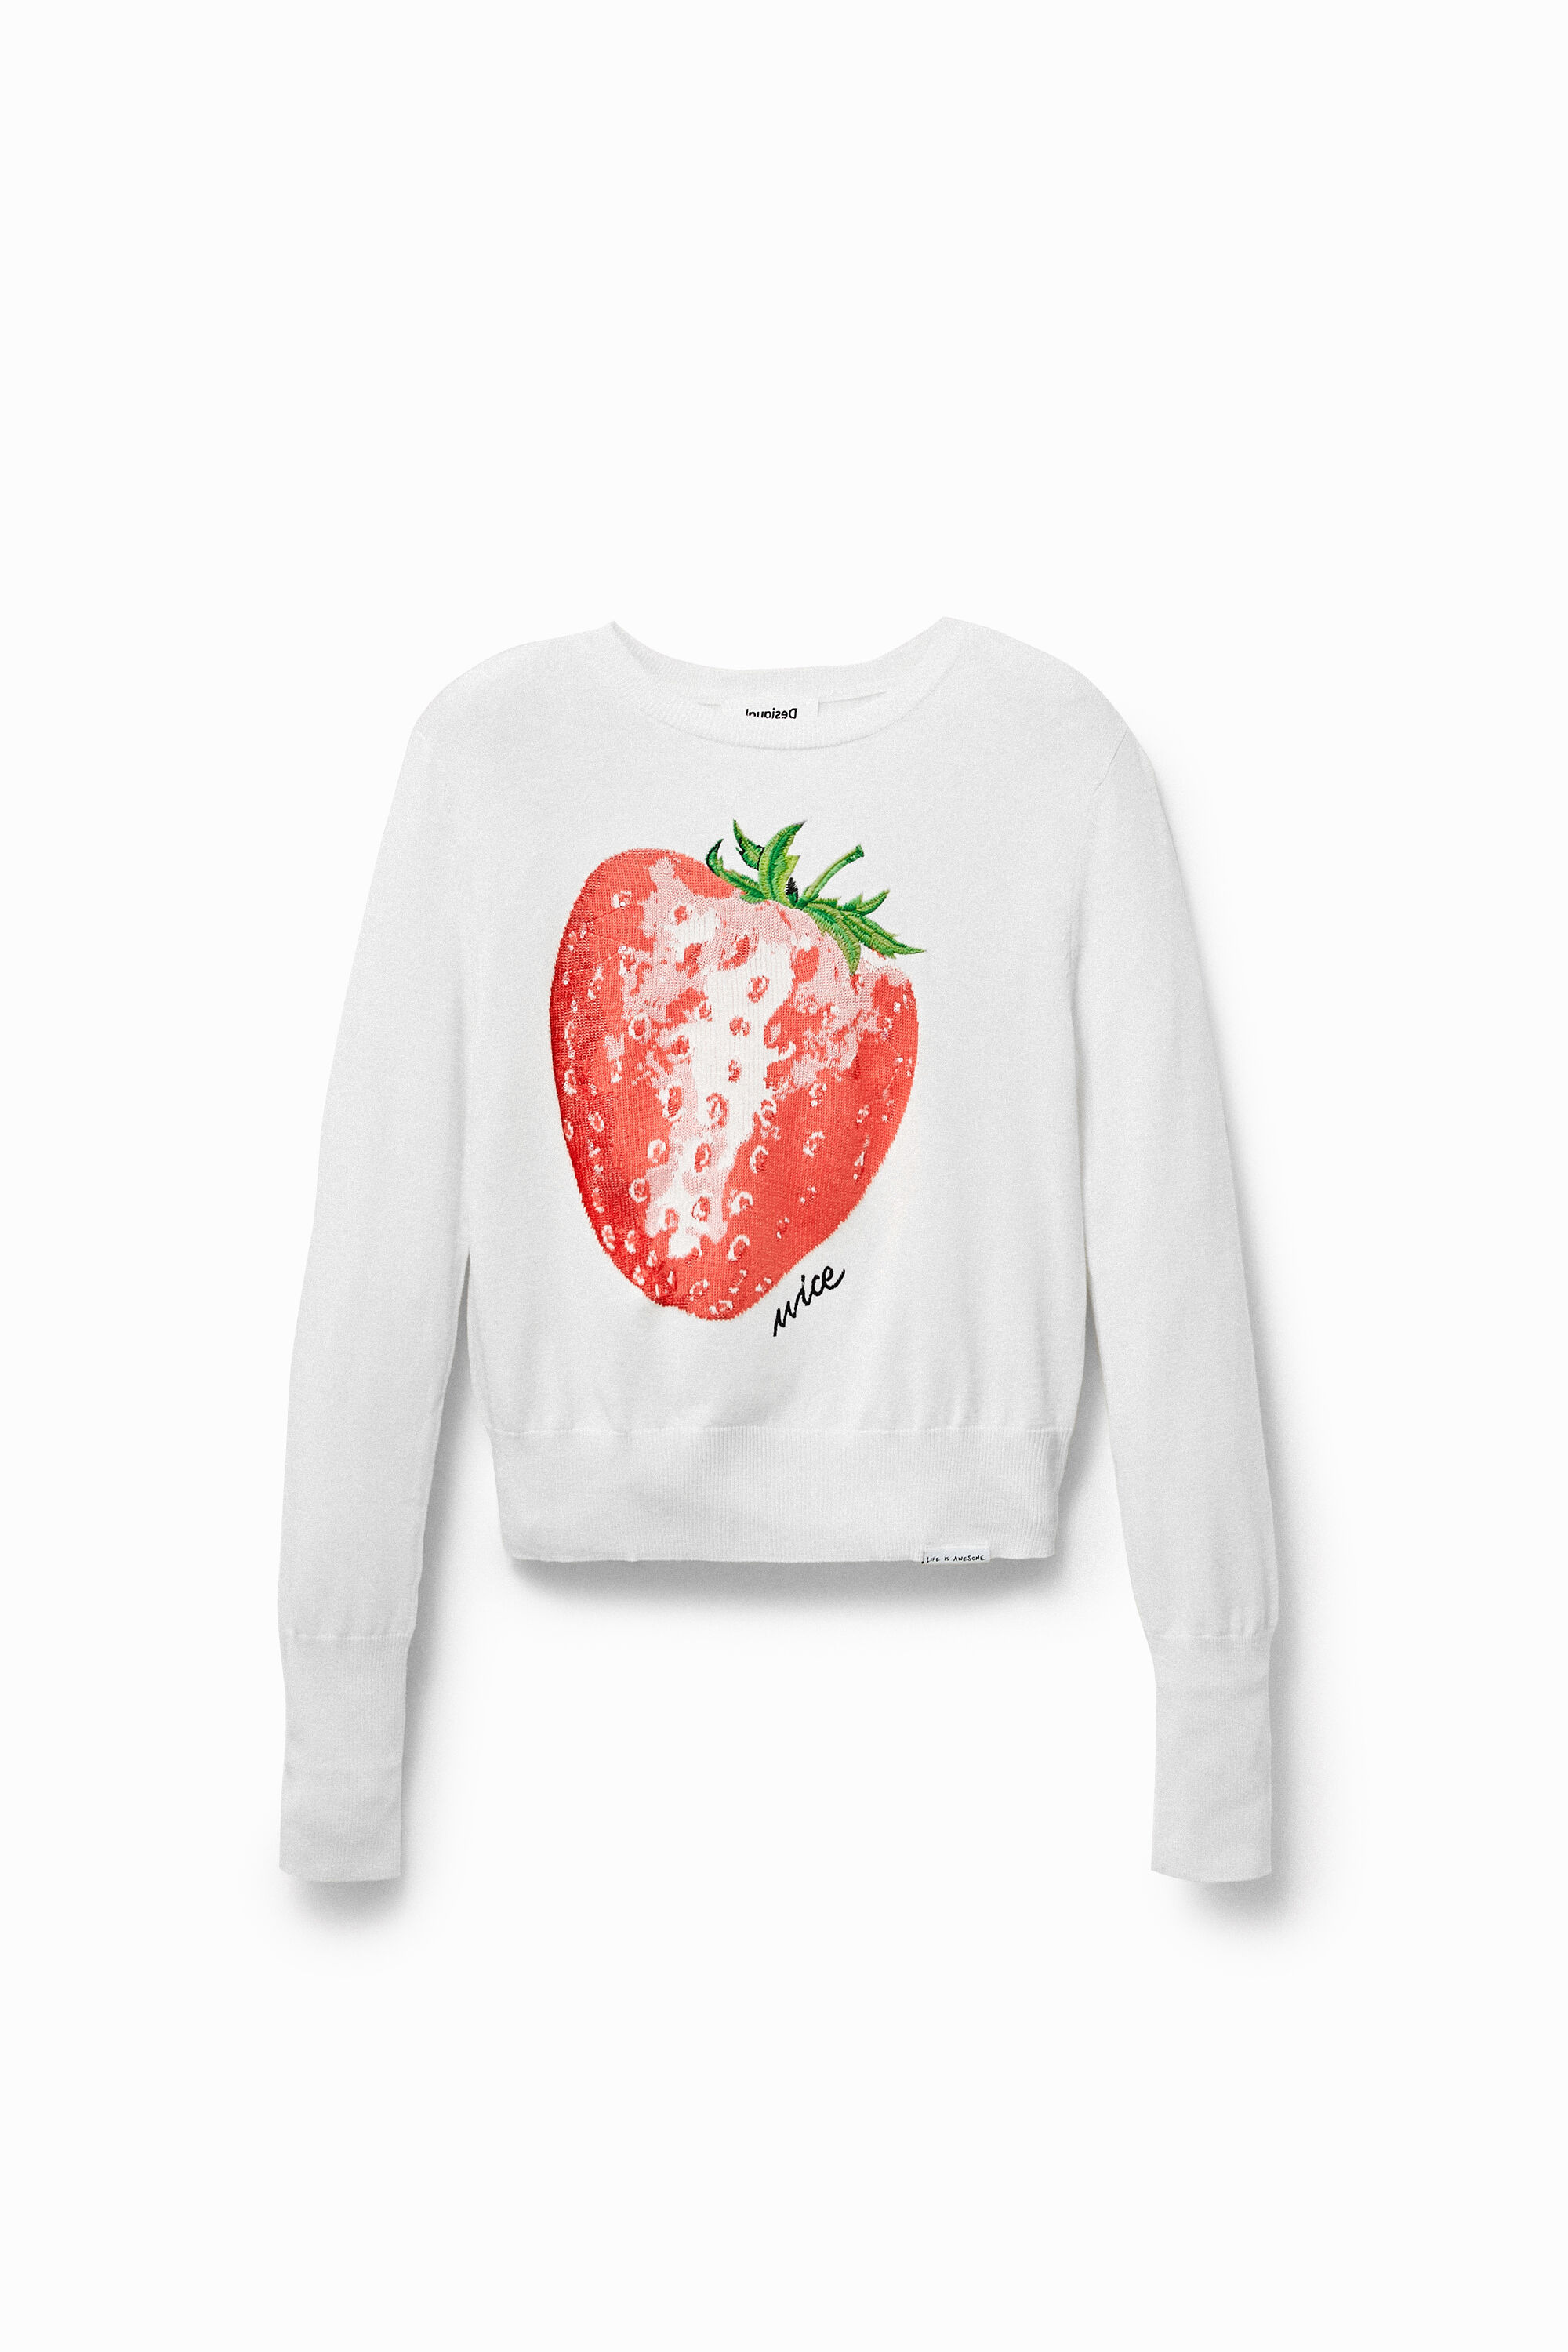 Cropped strawberry jumper - WHITE - M